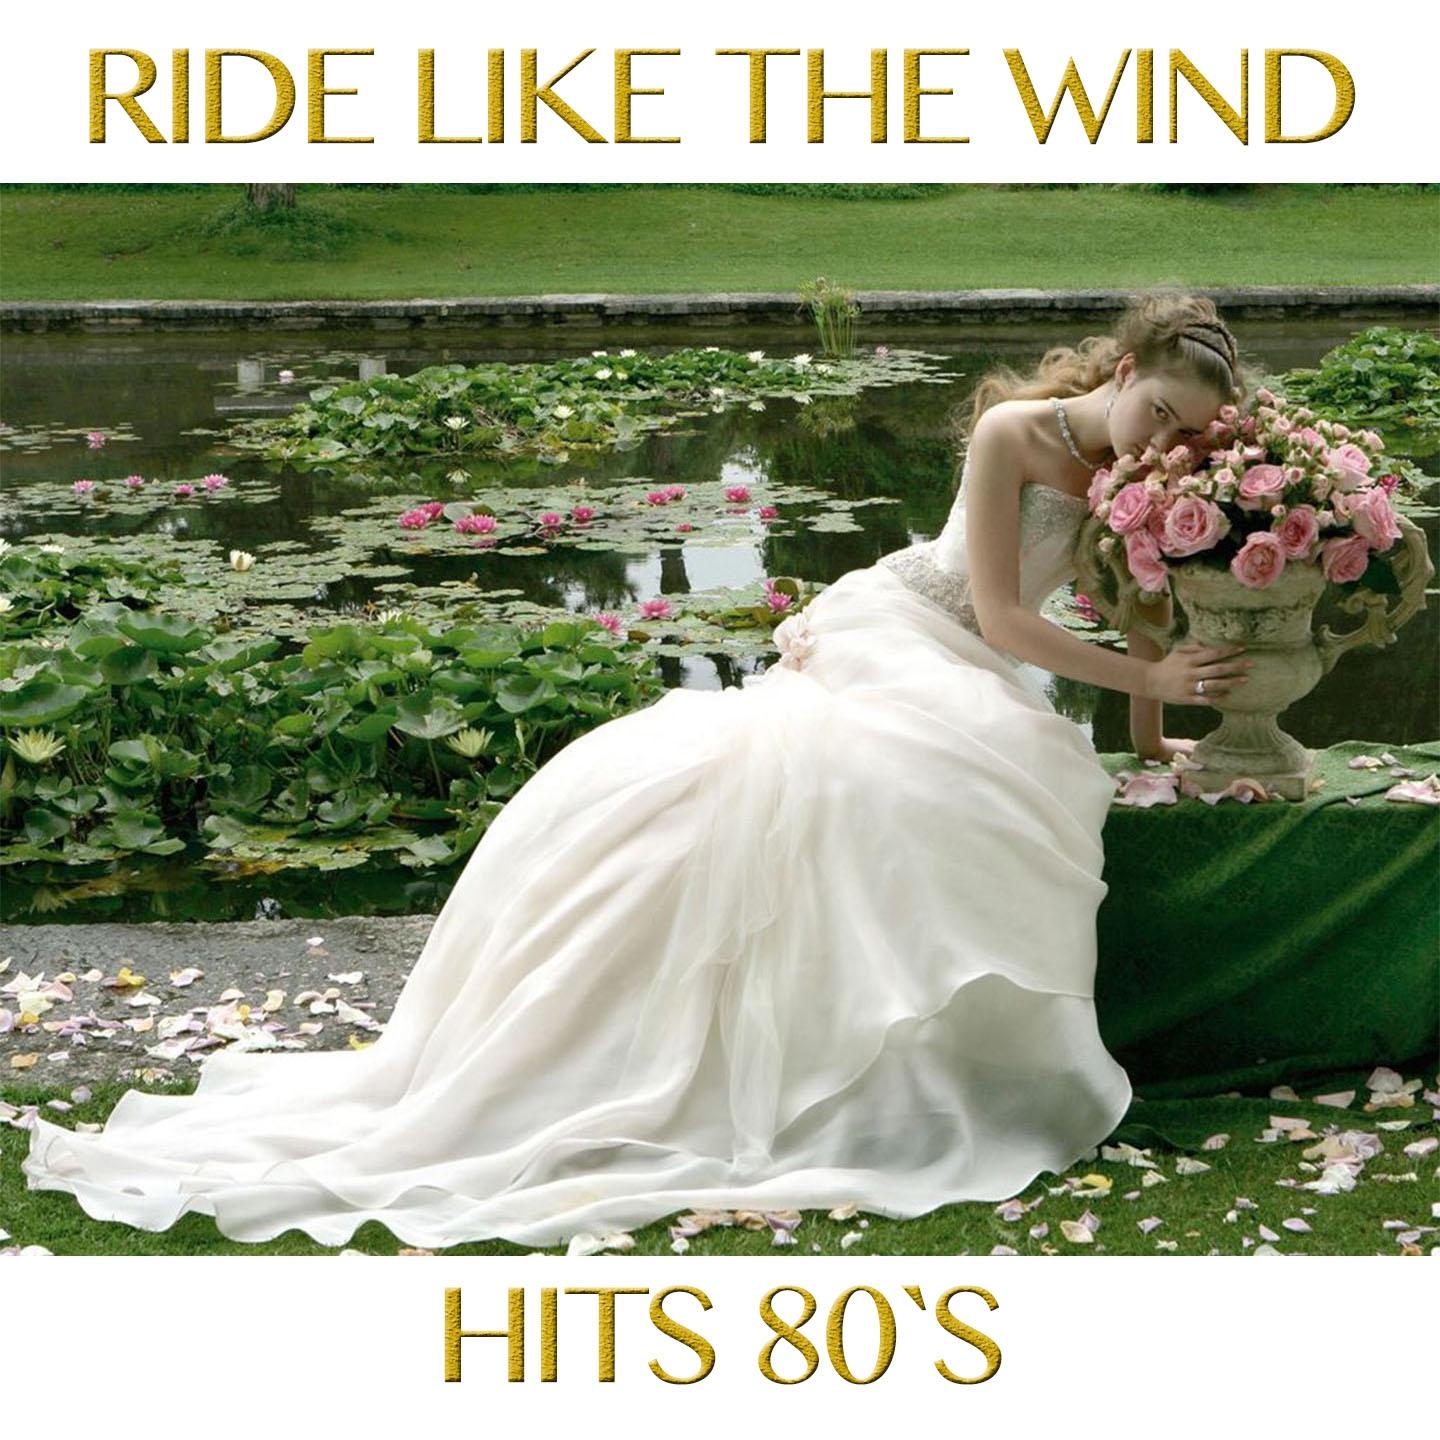 Ride Like the Wind (Hits 80's)